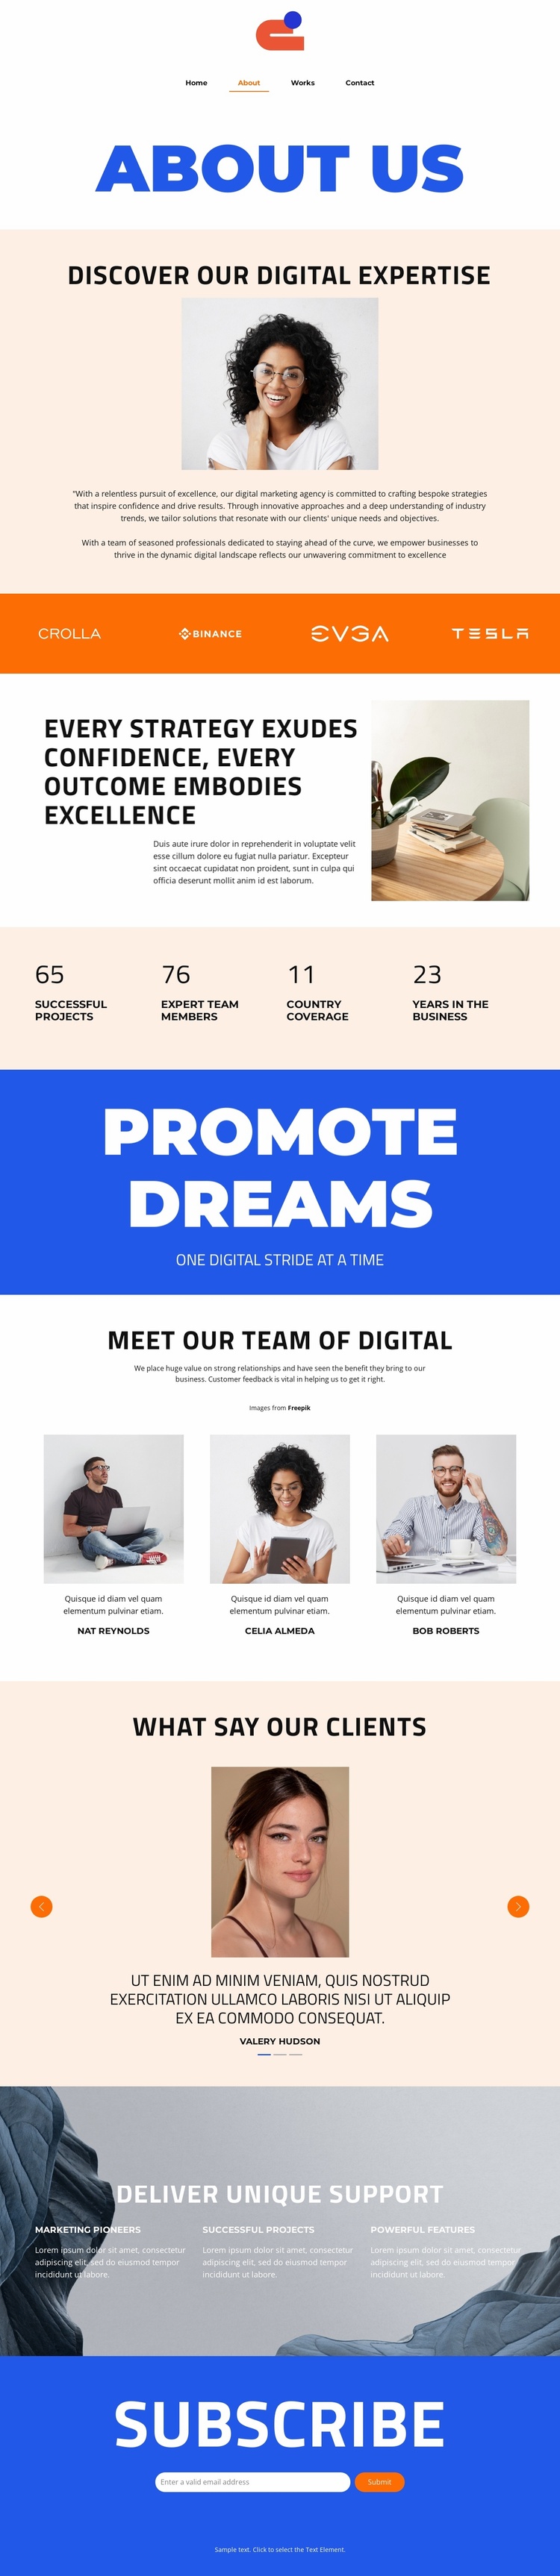 One digital stride at a time eCommerce Template